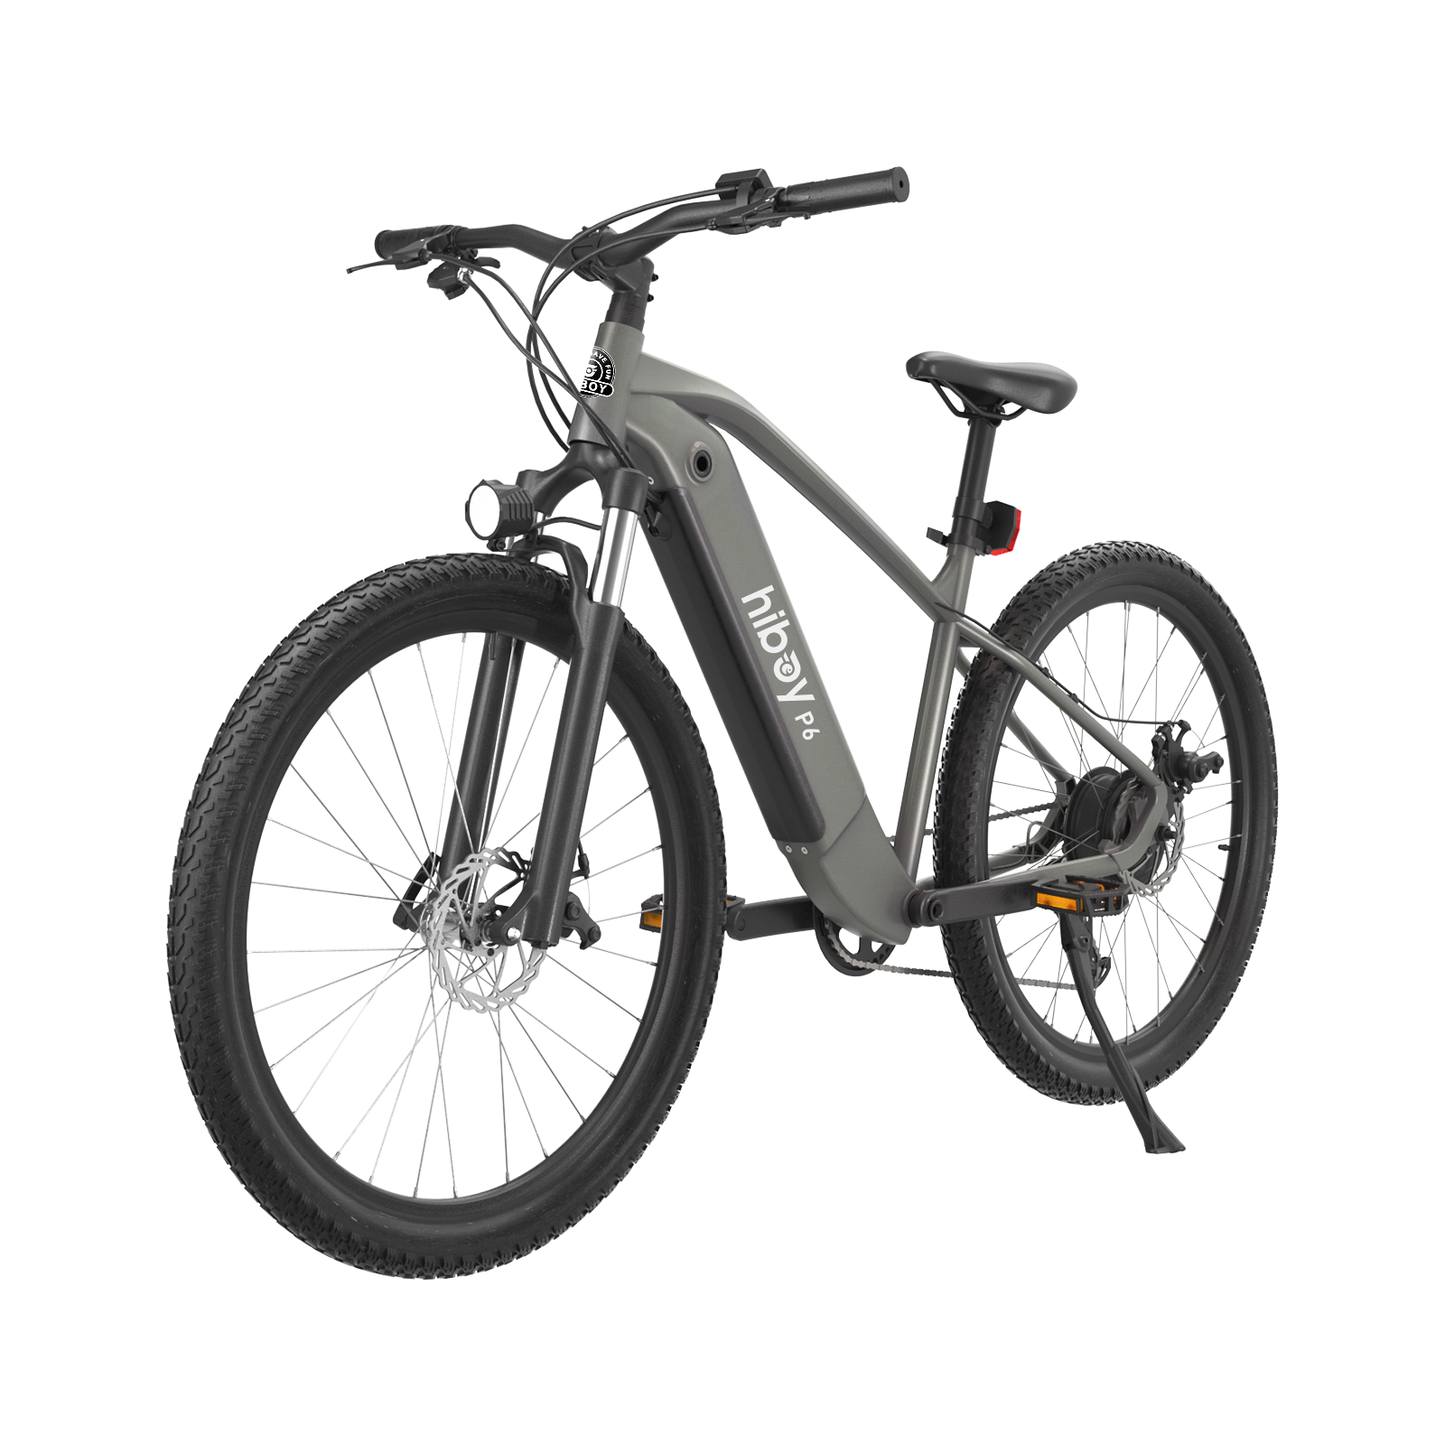 Hiboy P7 Commuter Electric Bike for Adults